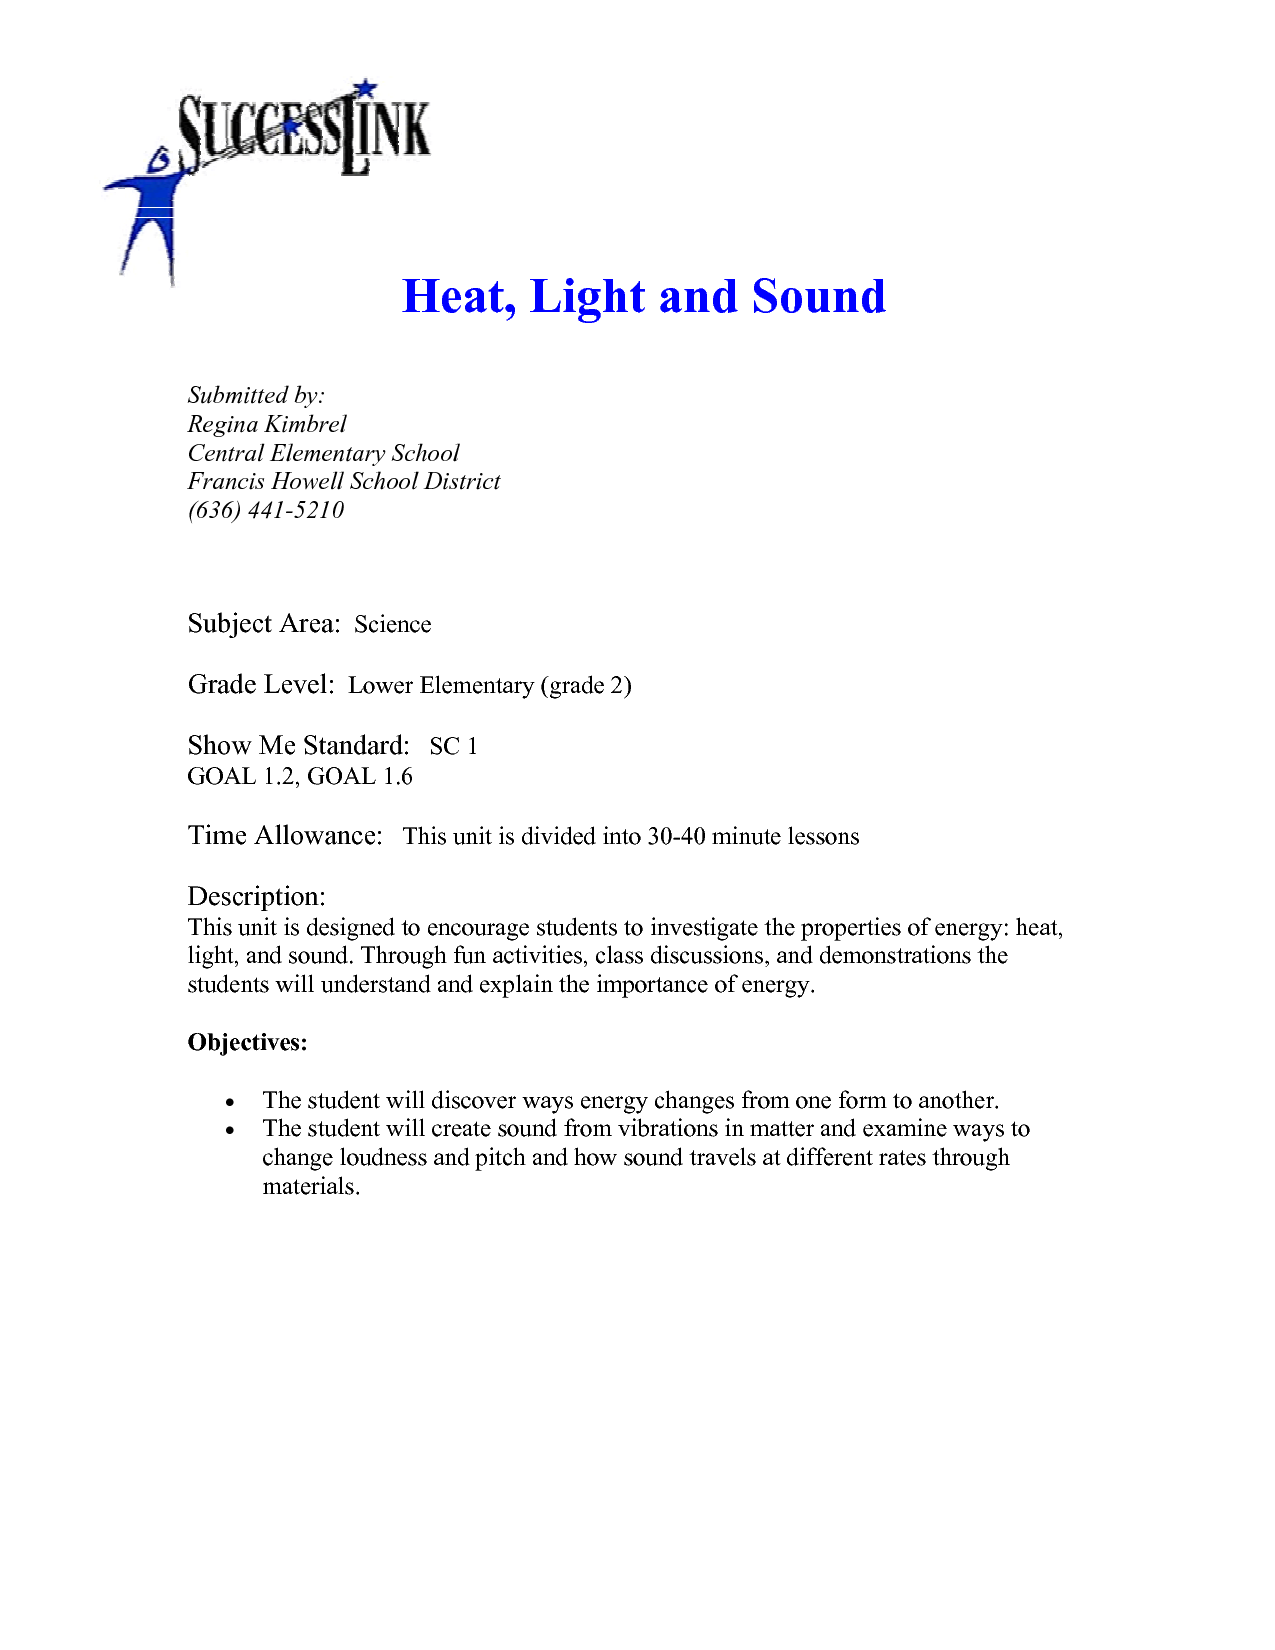 Sound and Light Worksheets Elementary Image